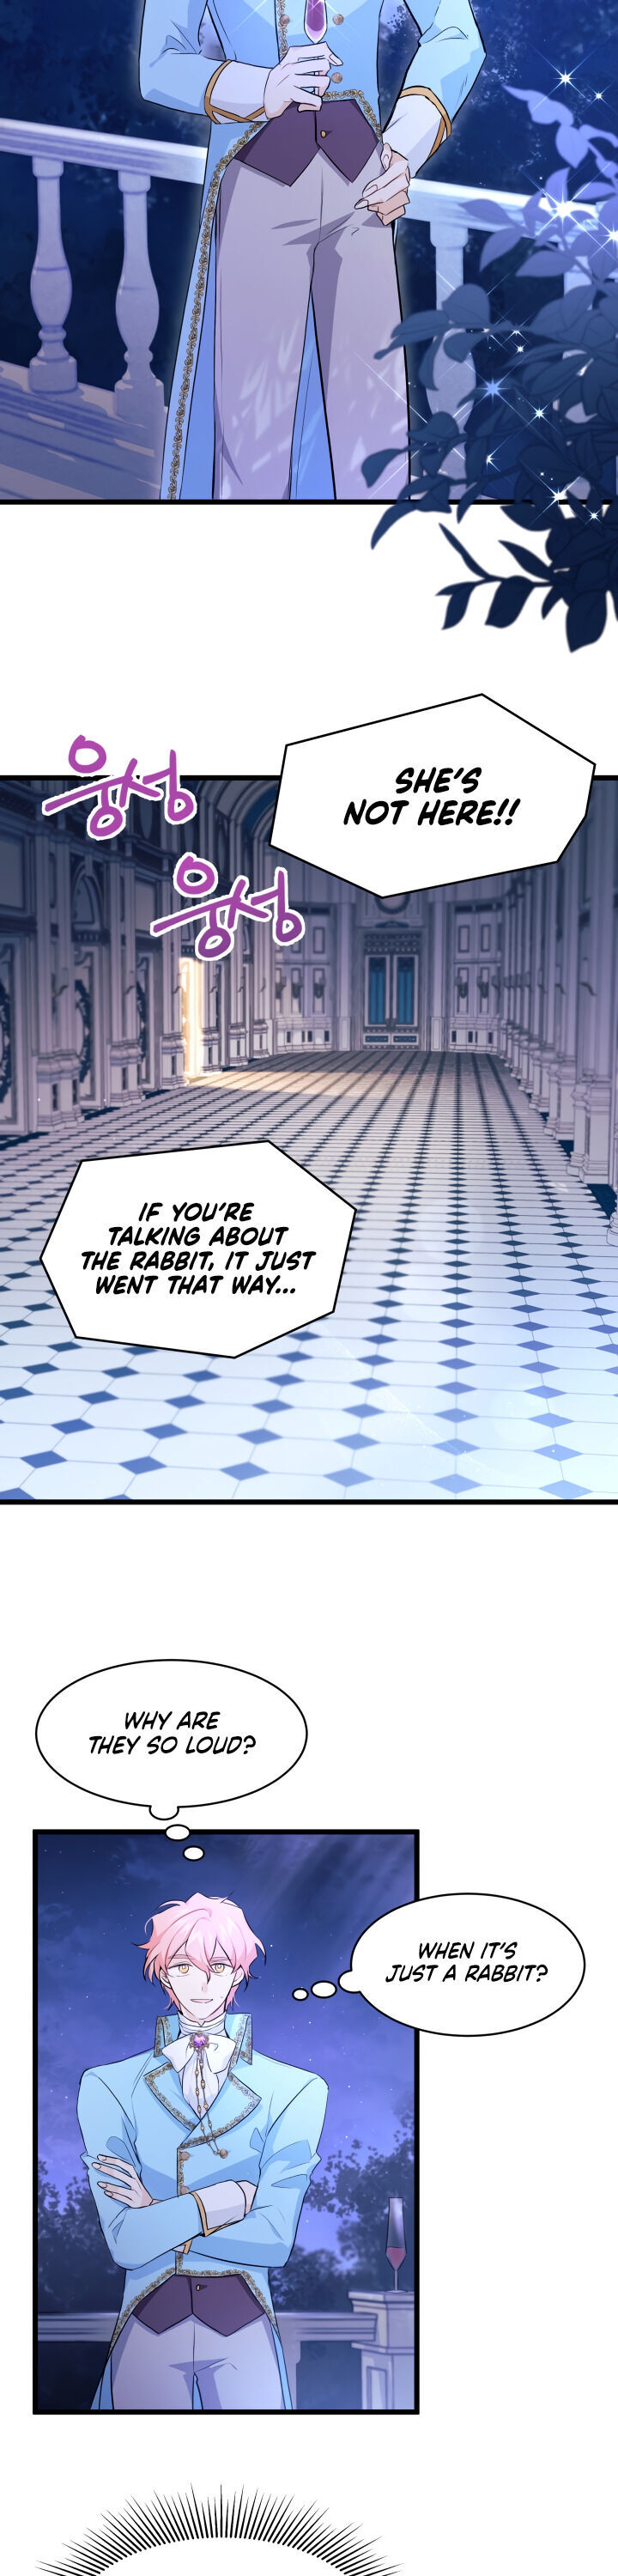 The Symbiotic Relationship Between A Rabbit and A Black Panther - Chapter 20 Page 5